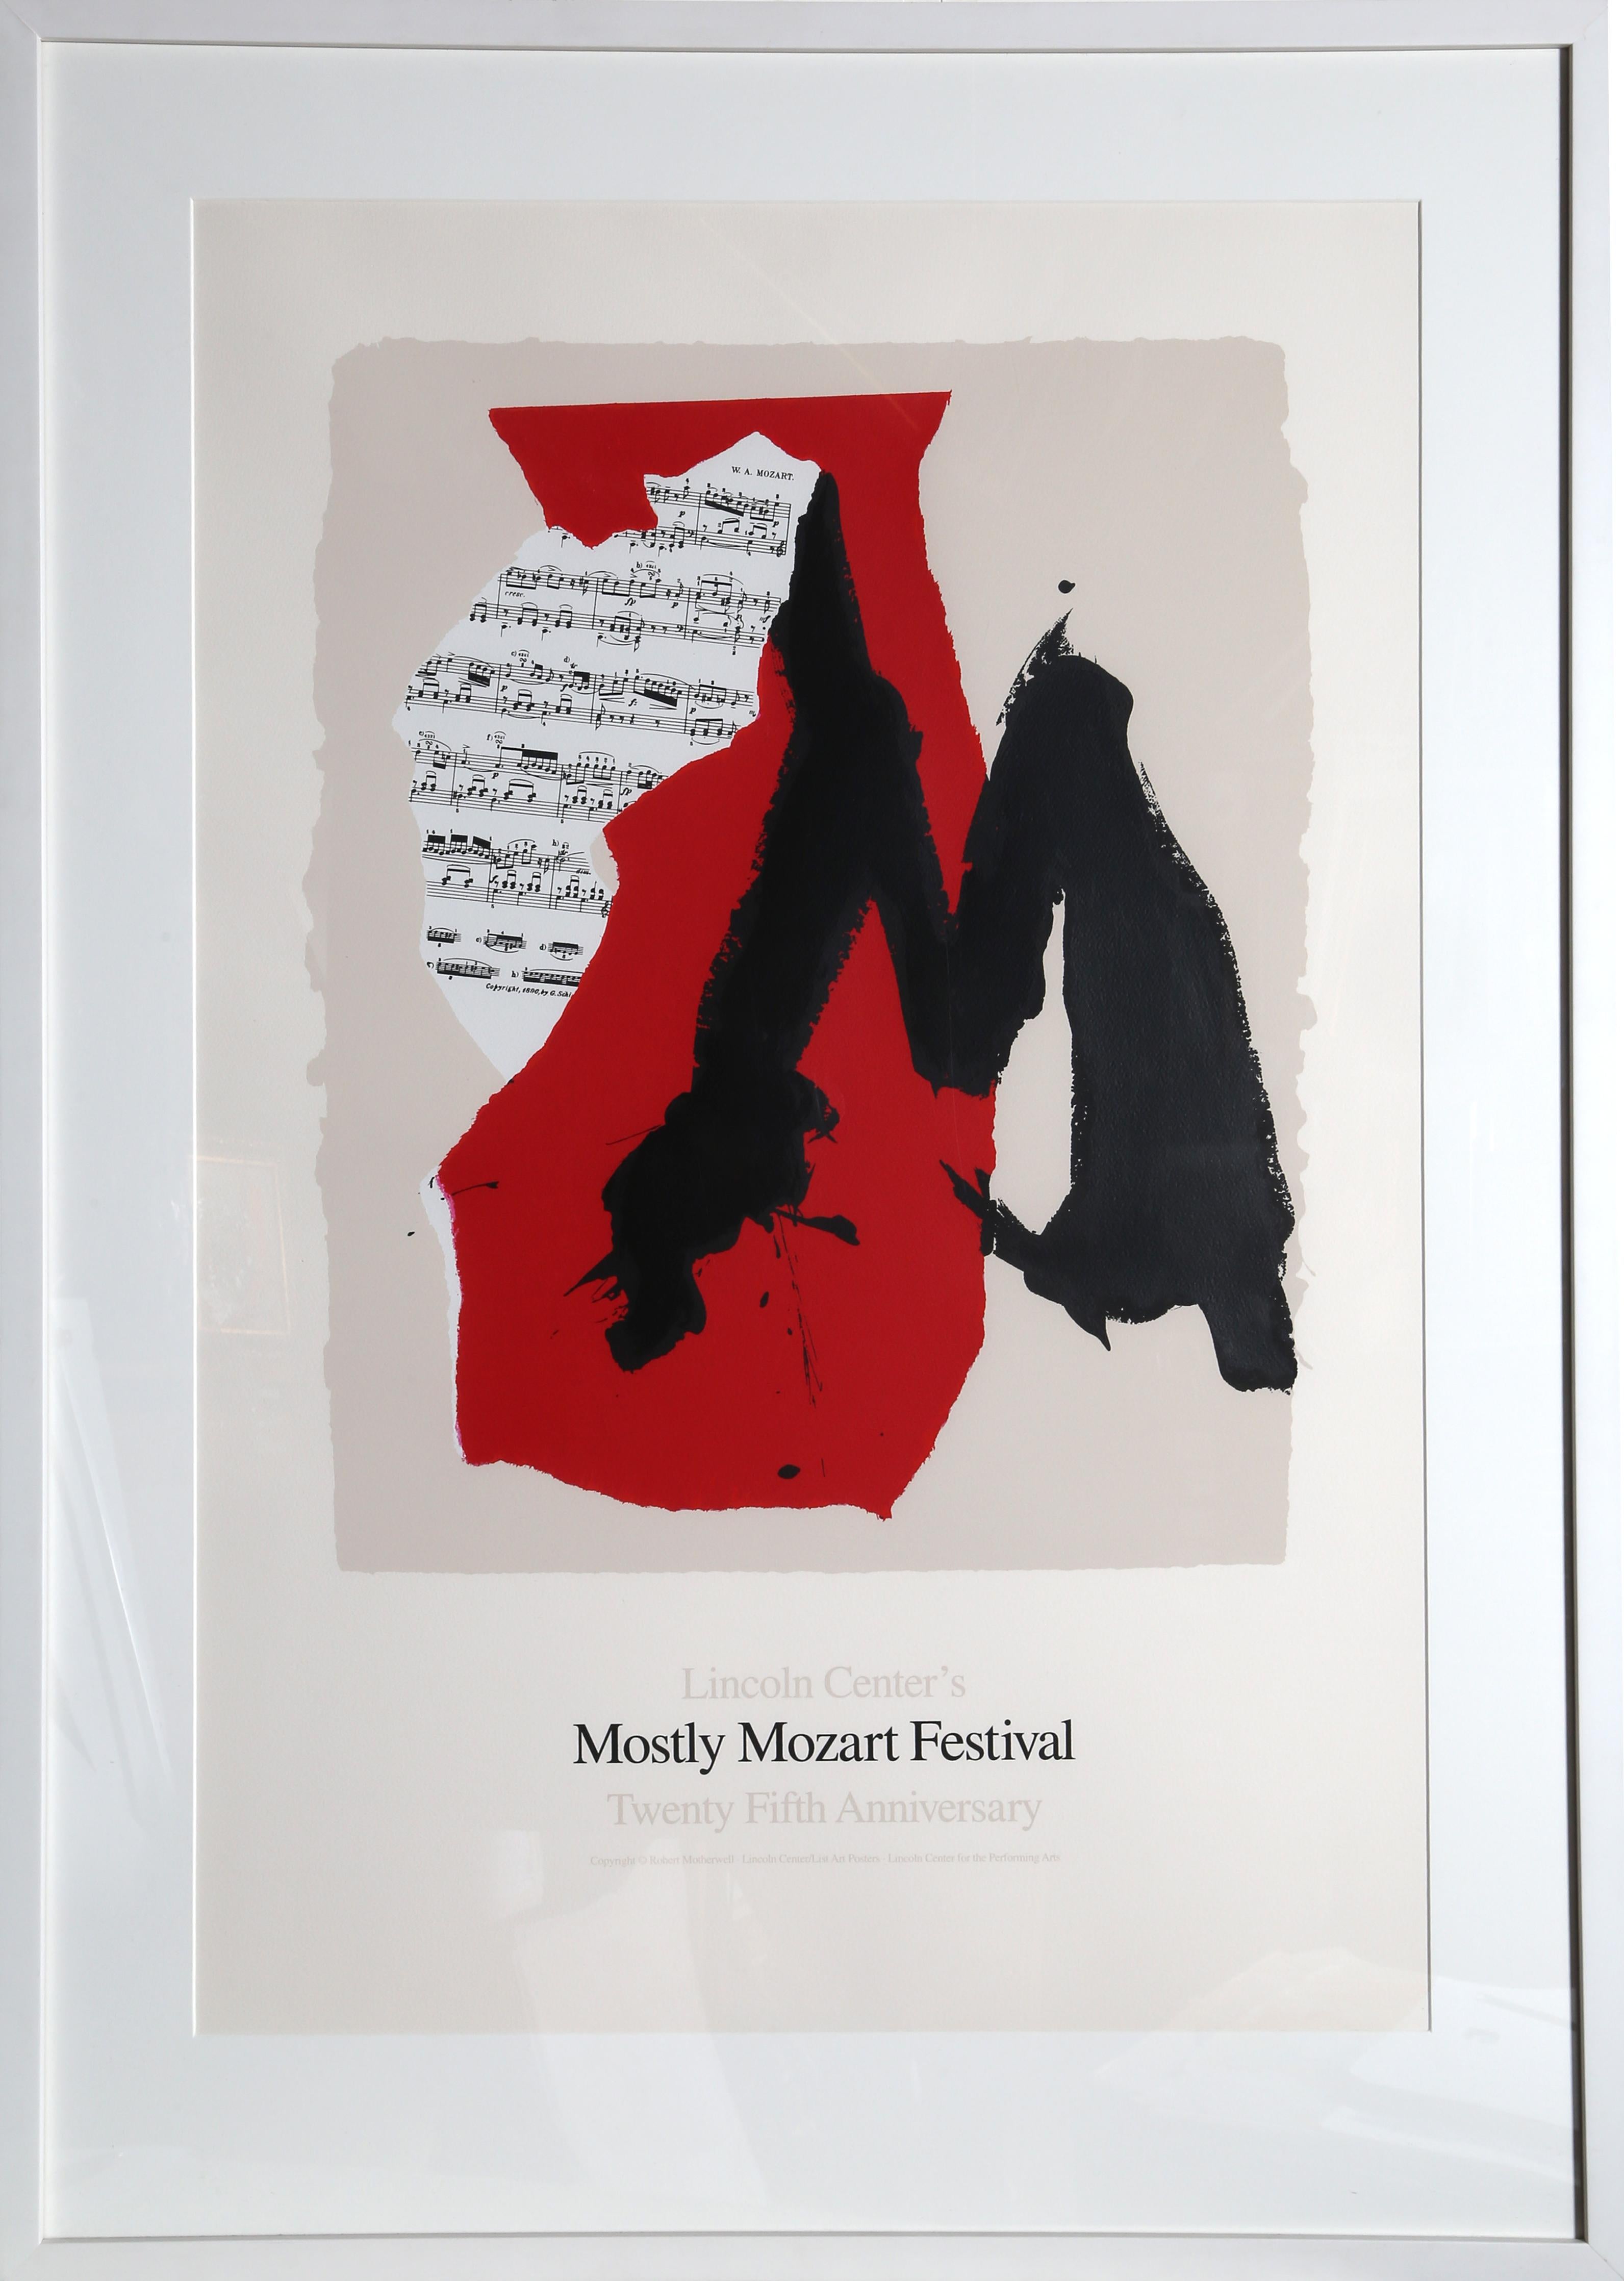 Robert Motherwell’s vibrant red lithograph features a collage-like composition with an intense contrast of black and red on top of sheet music.

Lincoln Center Mostly Mozart, 25th Anniversary
Robert Motherwell, American (1915–1991)
Date: